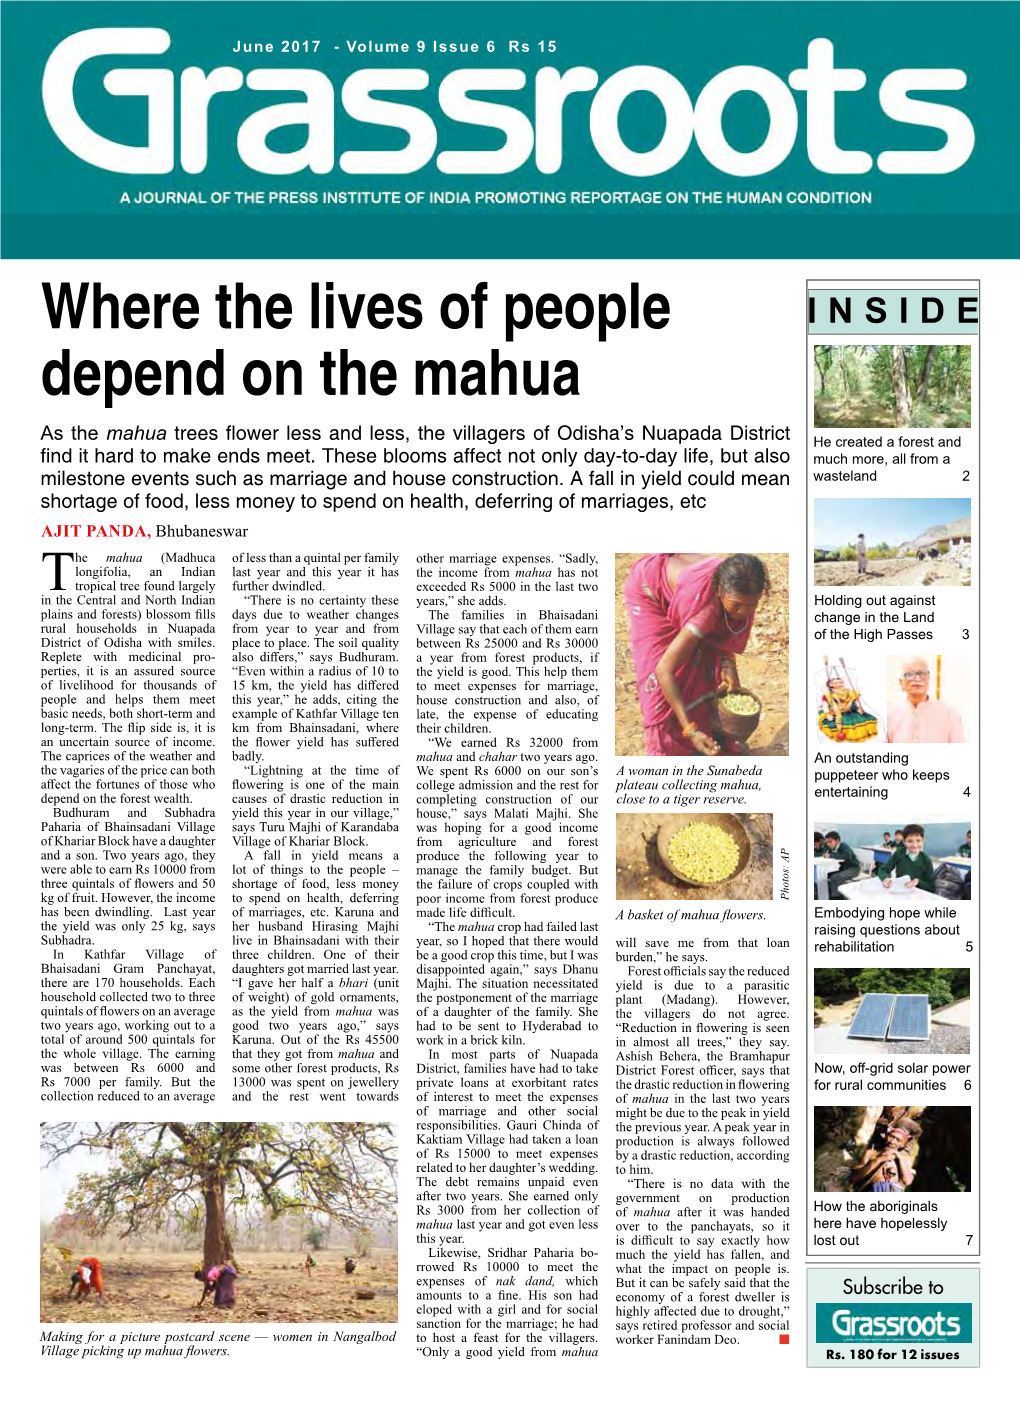 Where the Lives of People Depend on the Mahua